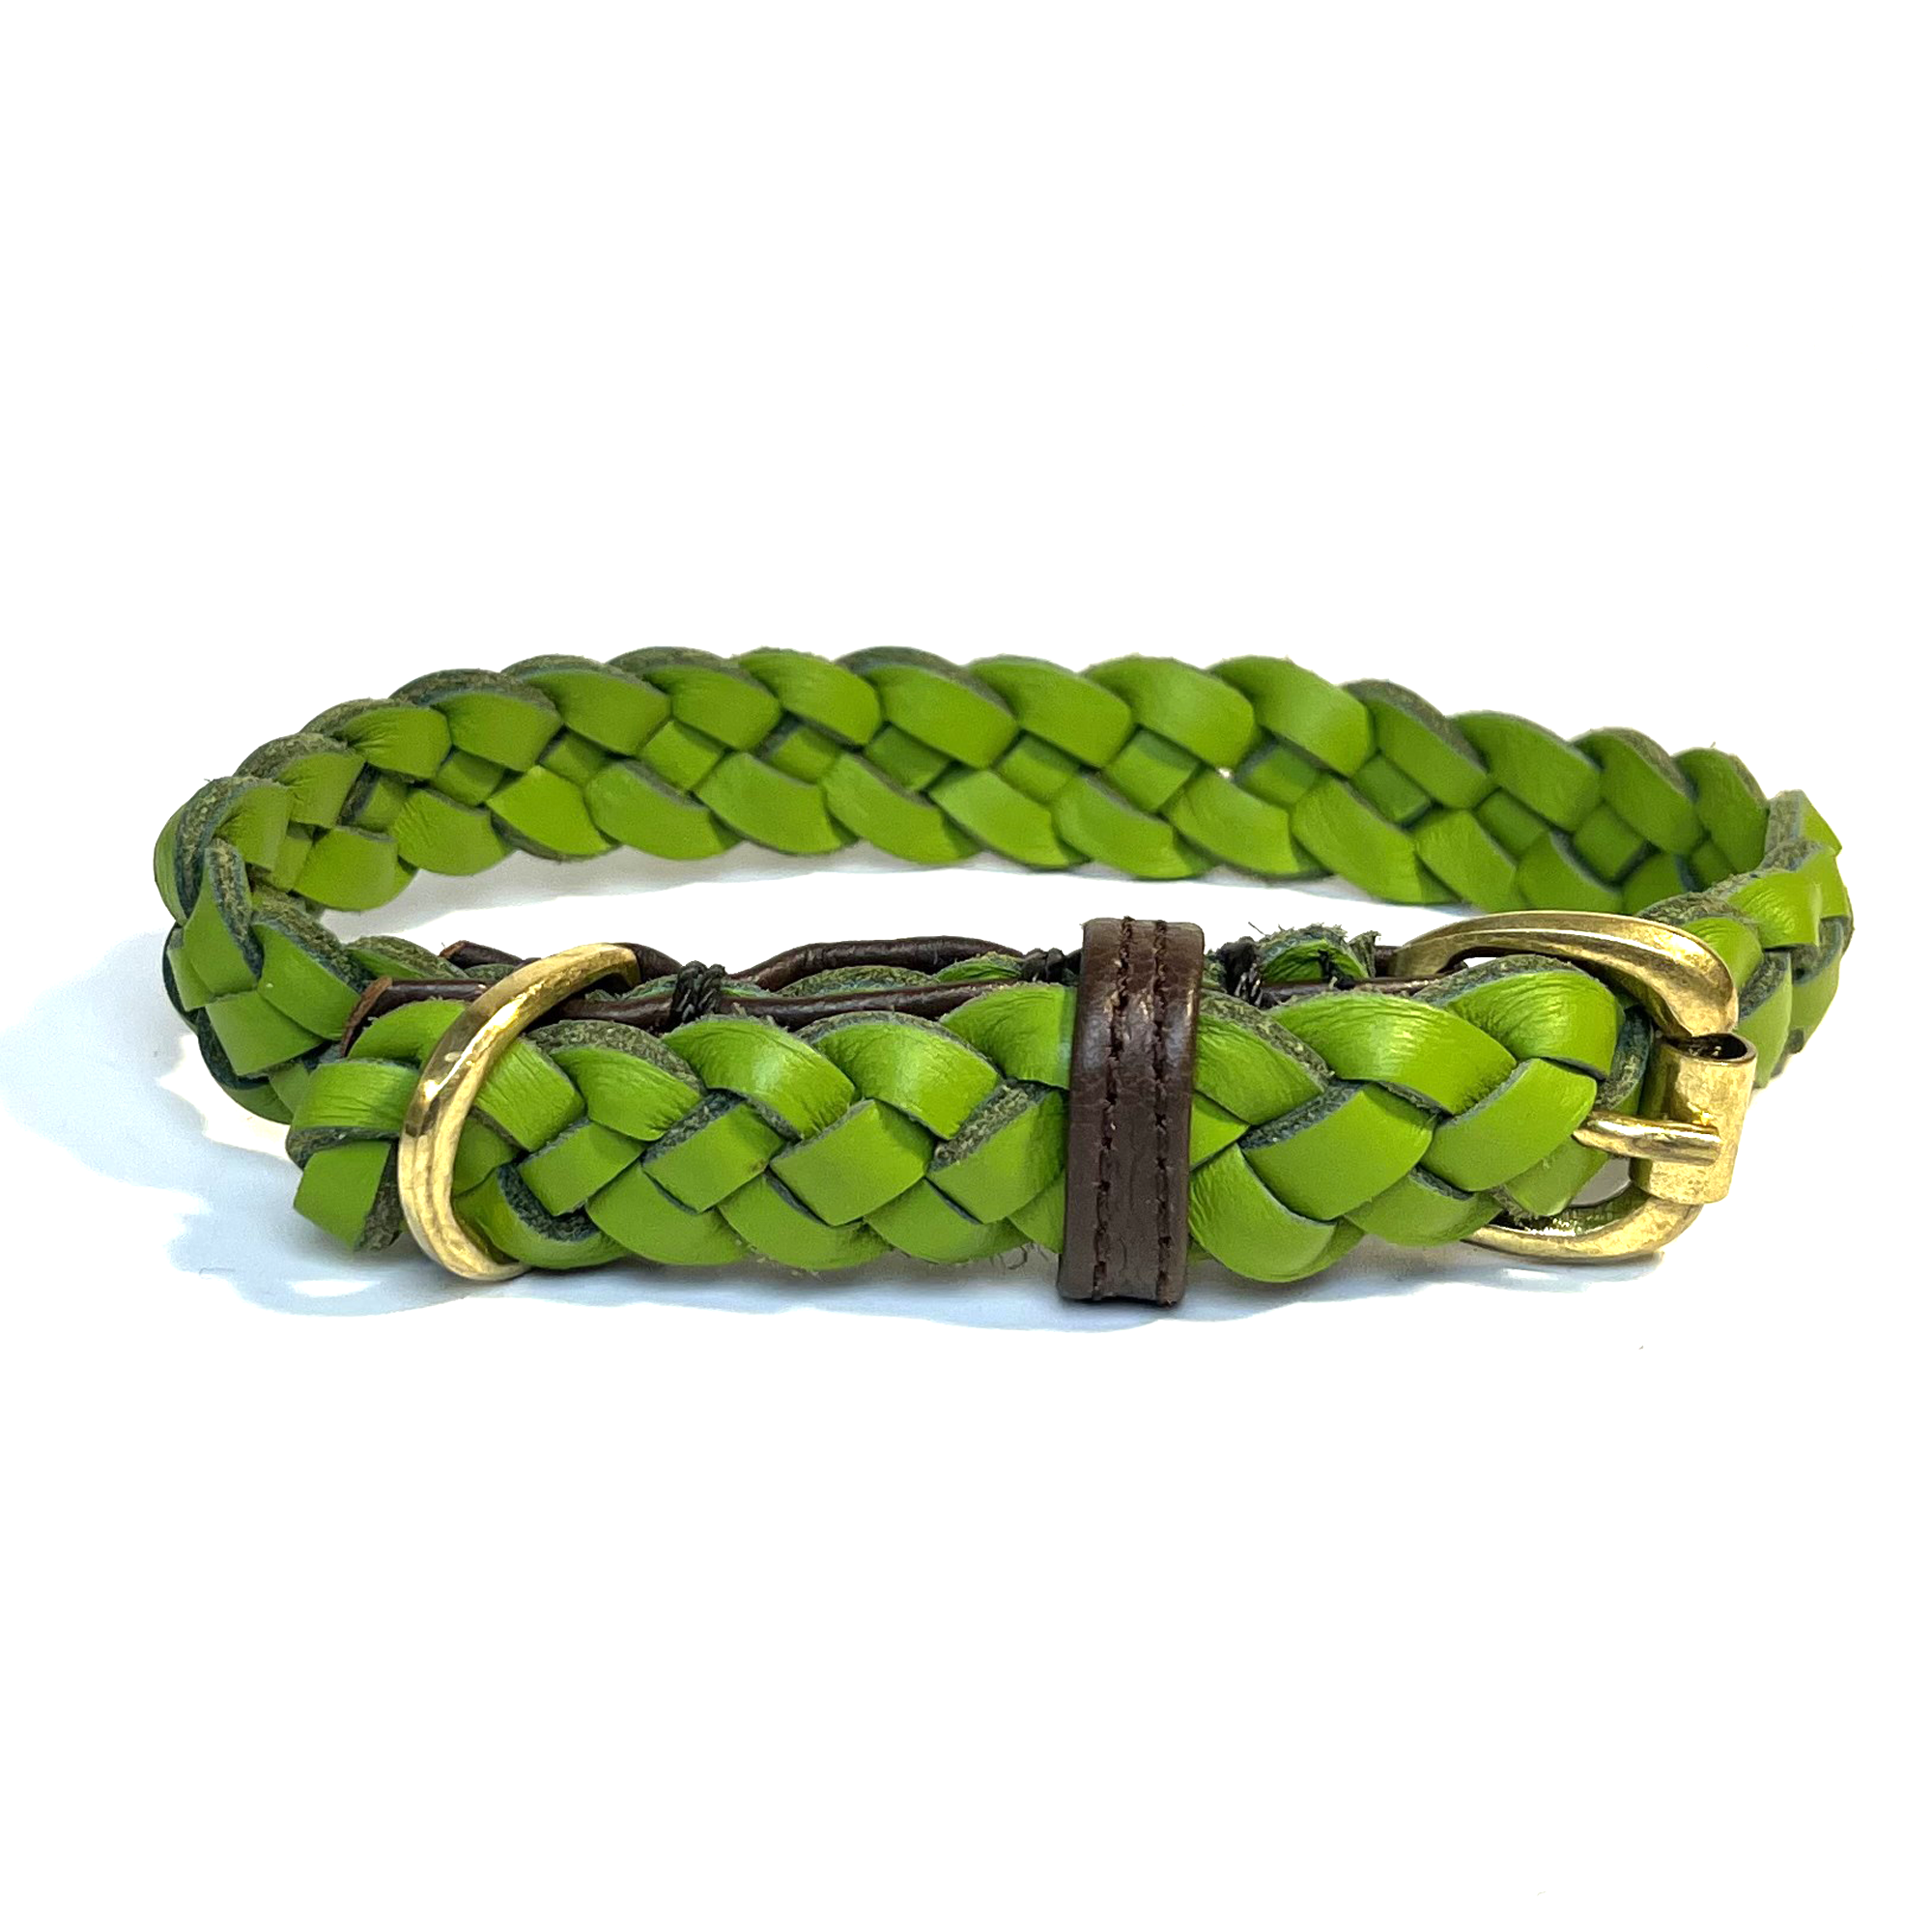 handmade flat 4 braid leather green dog collar with natural trim.  Soft, Strong, sustainable and compostable Buffalo Leather.  Aged brass buckle. Only for small dogs and puppies under 10kg